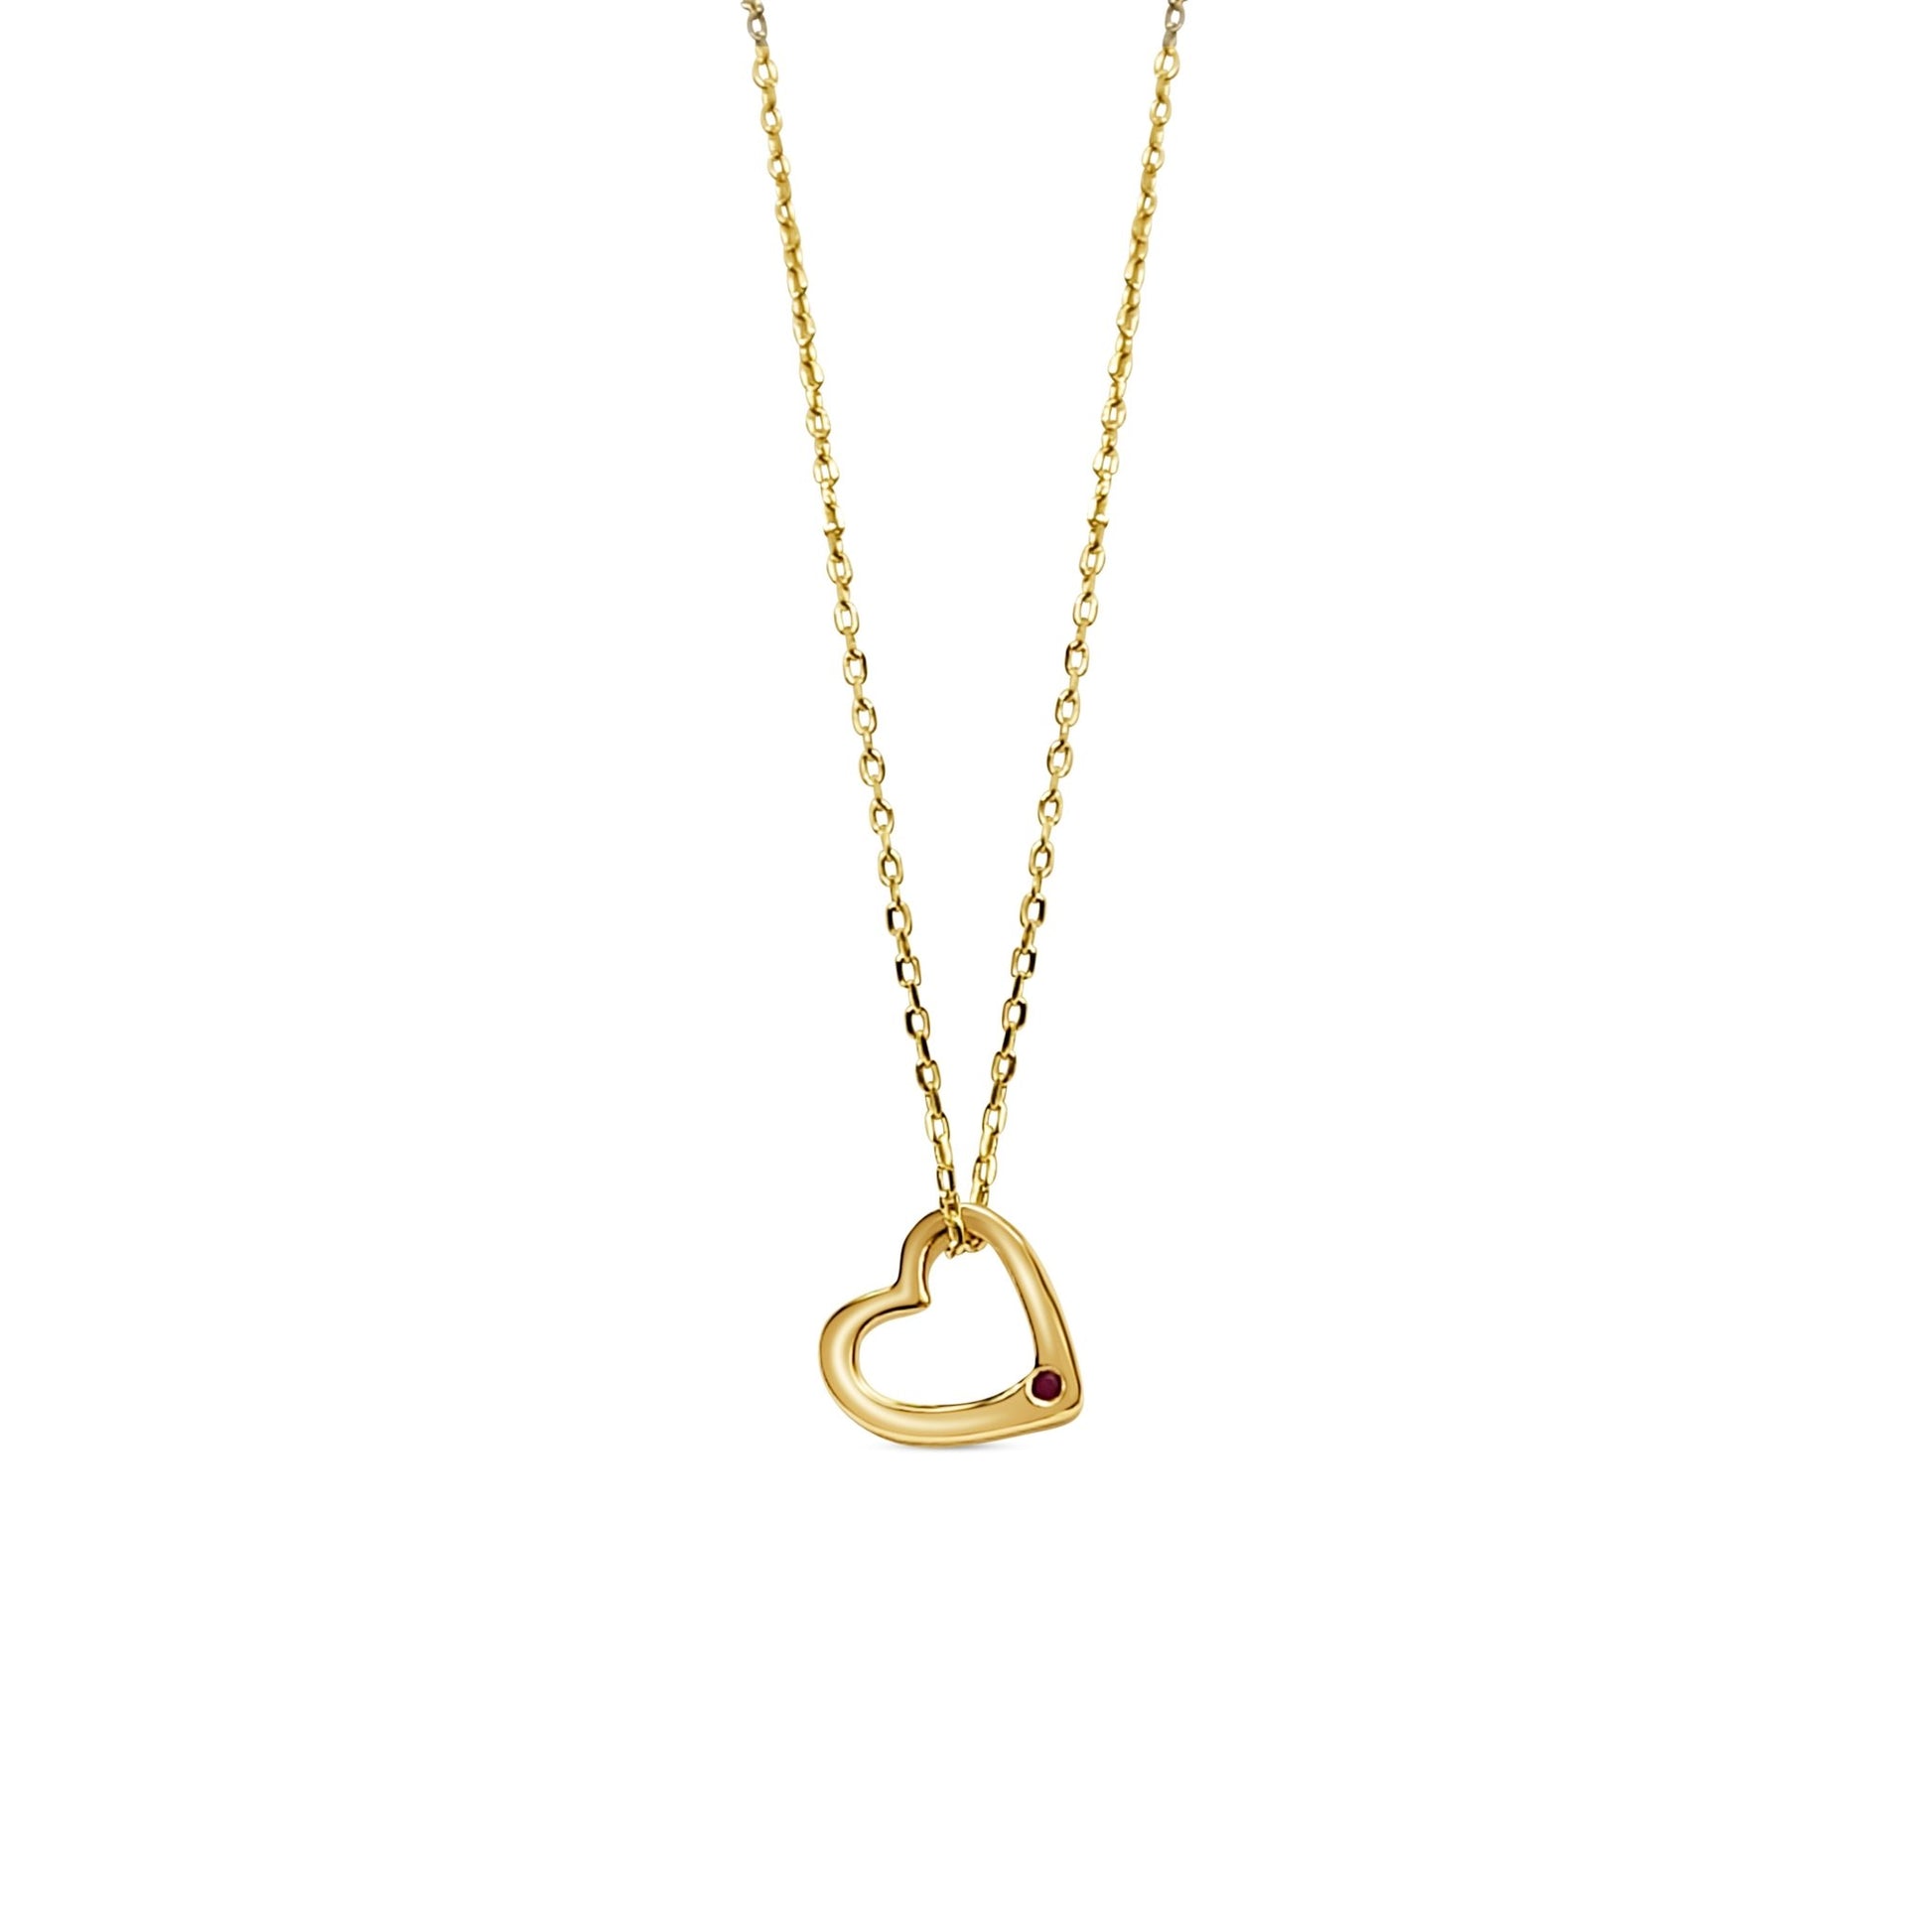 Classic and romantic gold pendant necklace with a ruby gemstone heart